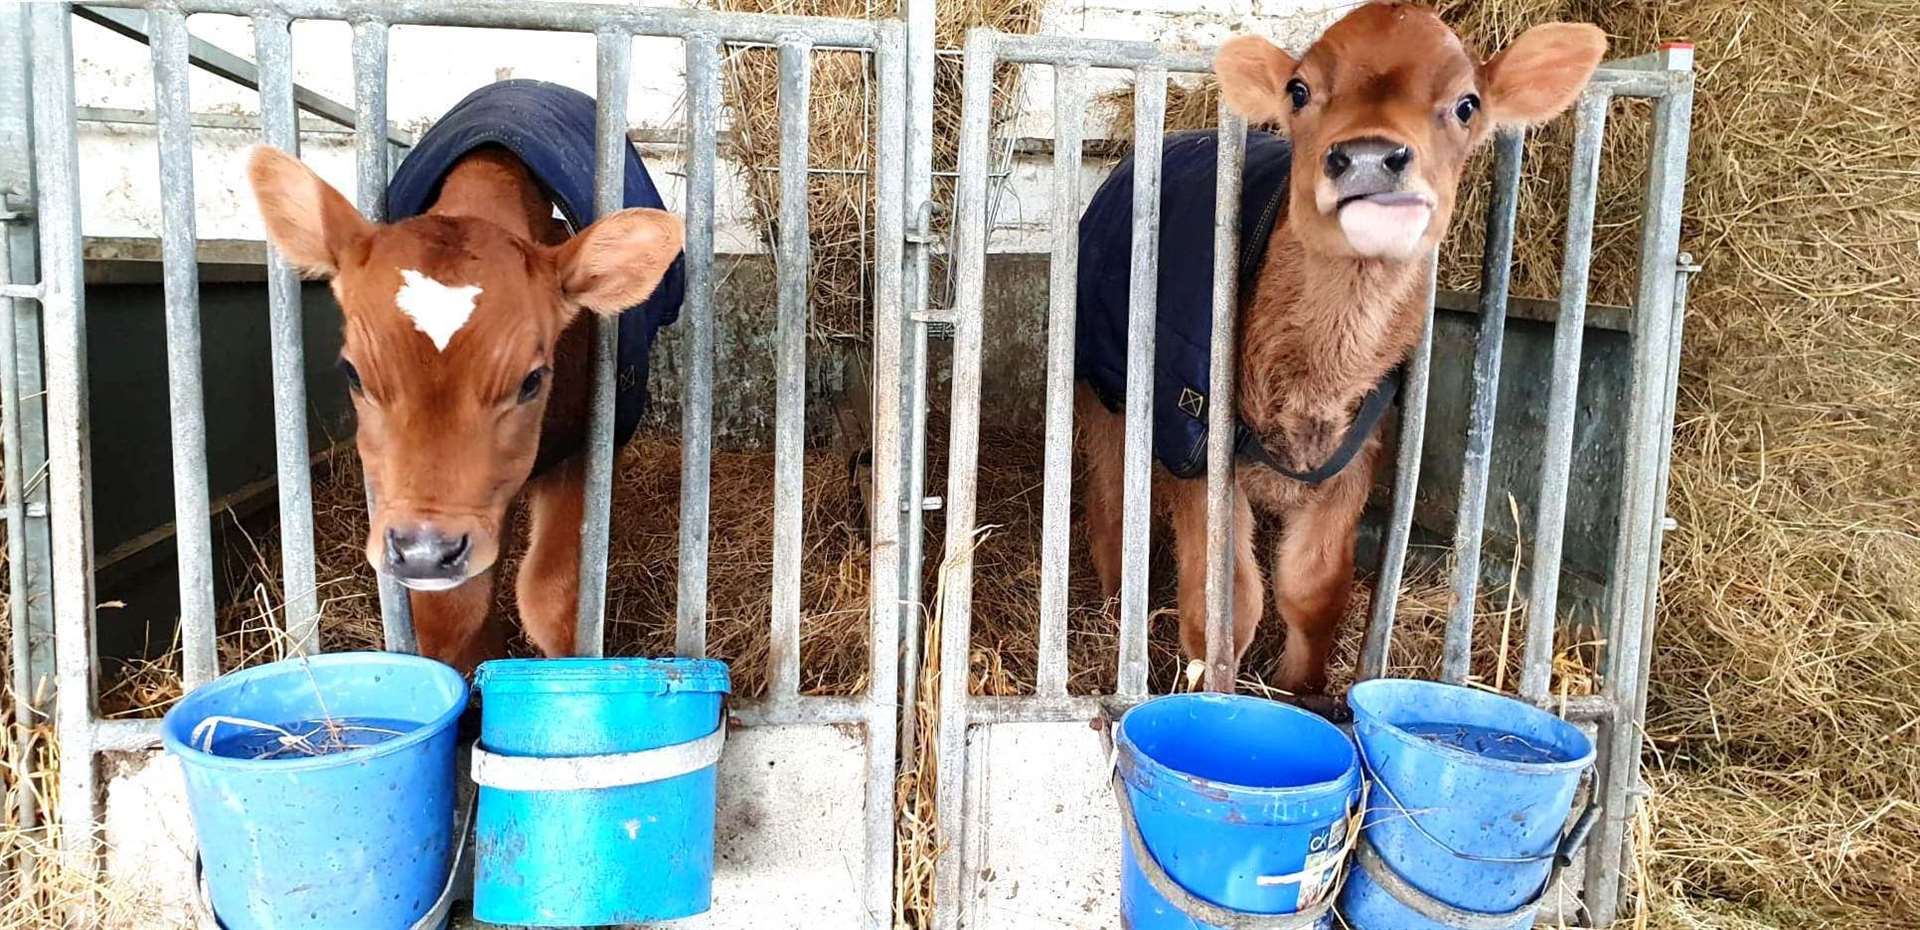 Lorna, left, with her twin brother Marryot at Thrumster Mains farm. The two calves are part of a Jersey herd owned by David Campbell and brought up to organic standards. Pic: Catherine MacLeod